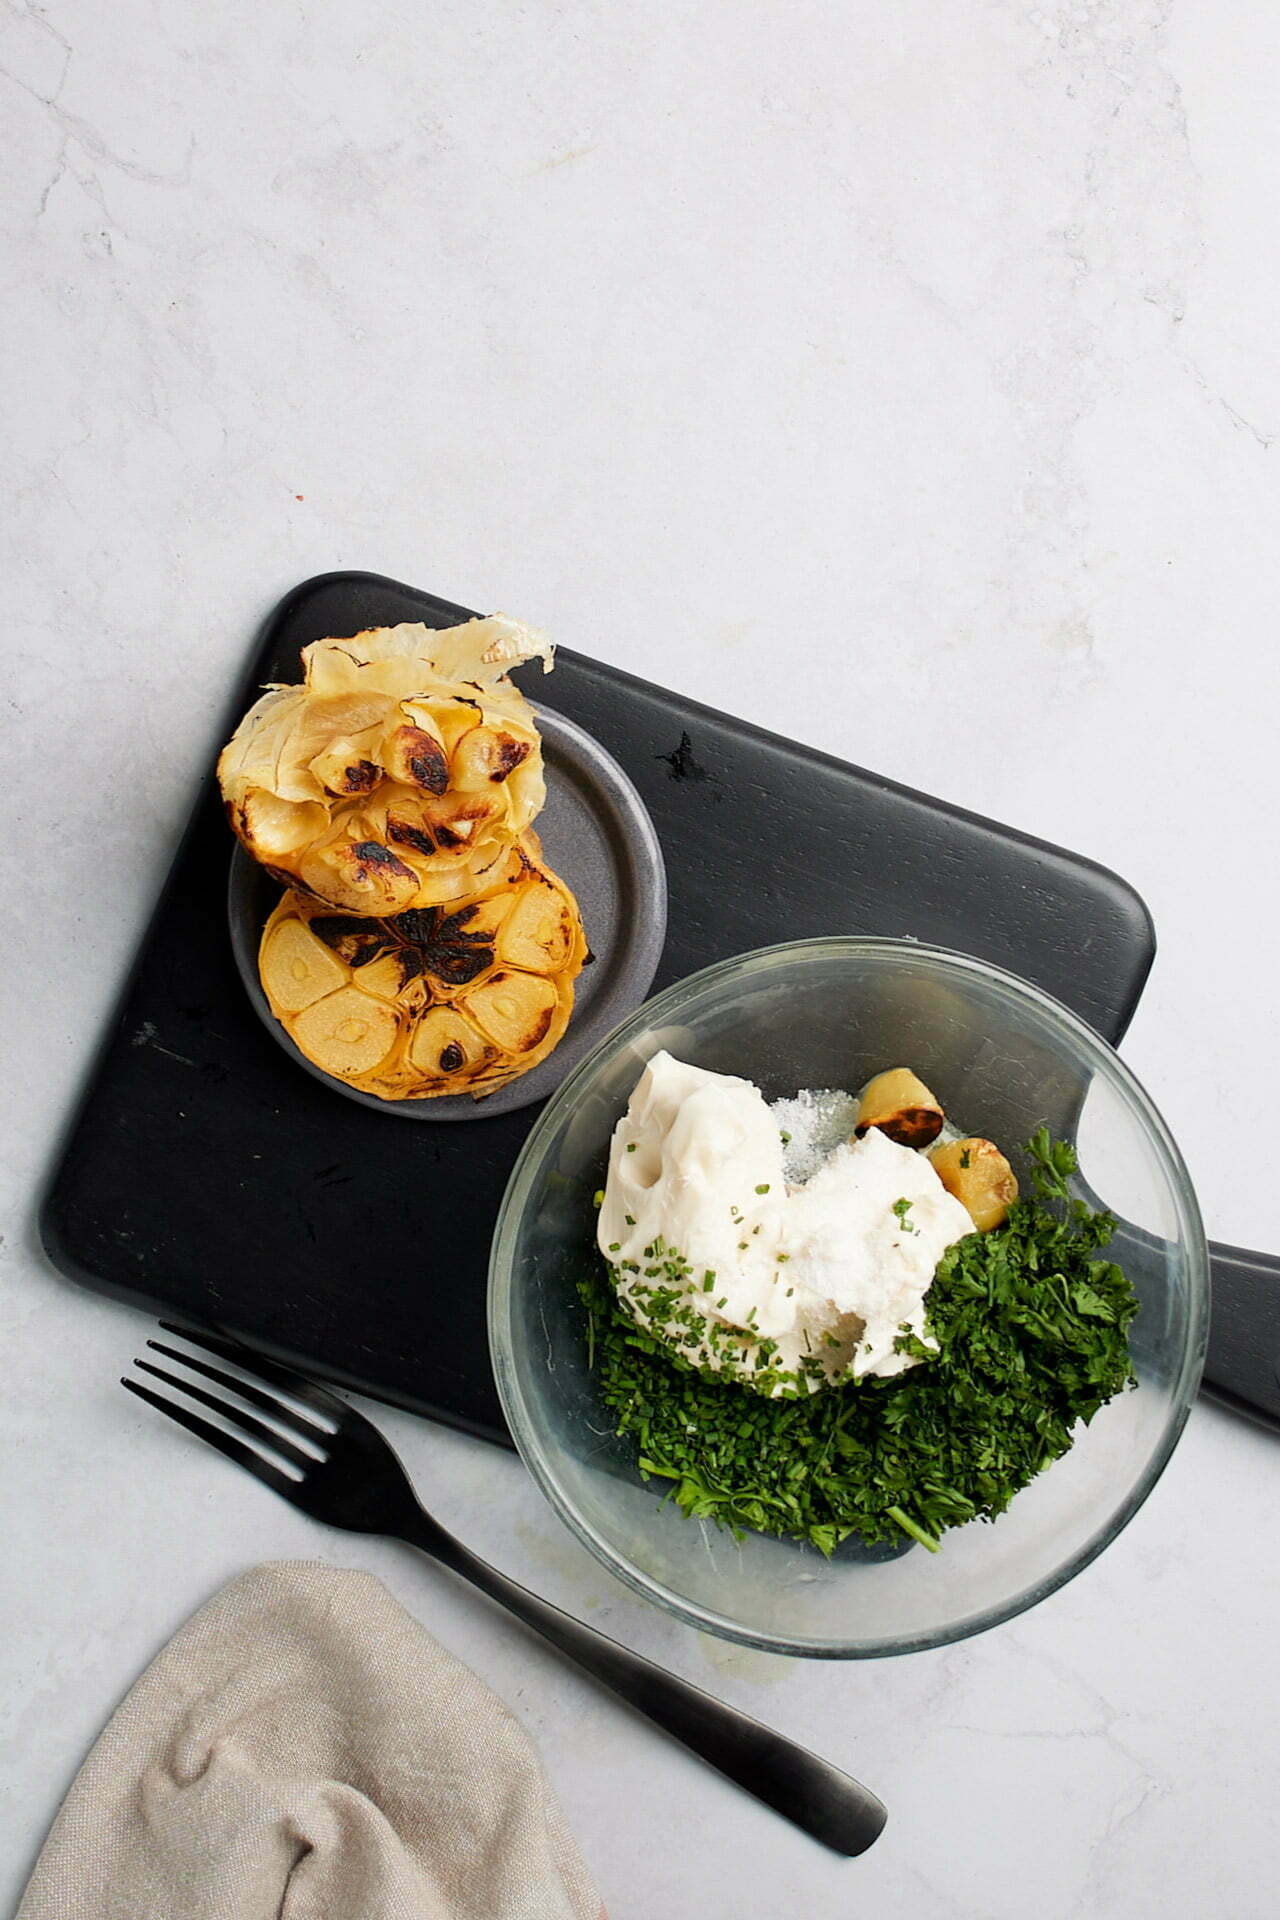 Overhead view of ingredients on a black cutting board and a white surface. A glass bowl contains a mixture of chopped green herbs, what appears to be sour cream, and roasted garlic. To the left, there's herbed butter next to a halved bulb of roasted garlic. A fork and a beige napkin are placed in the bottom left corner.